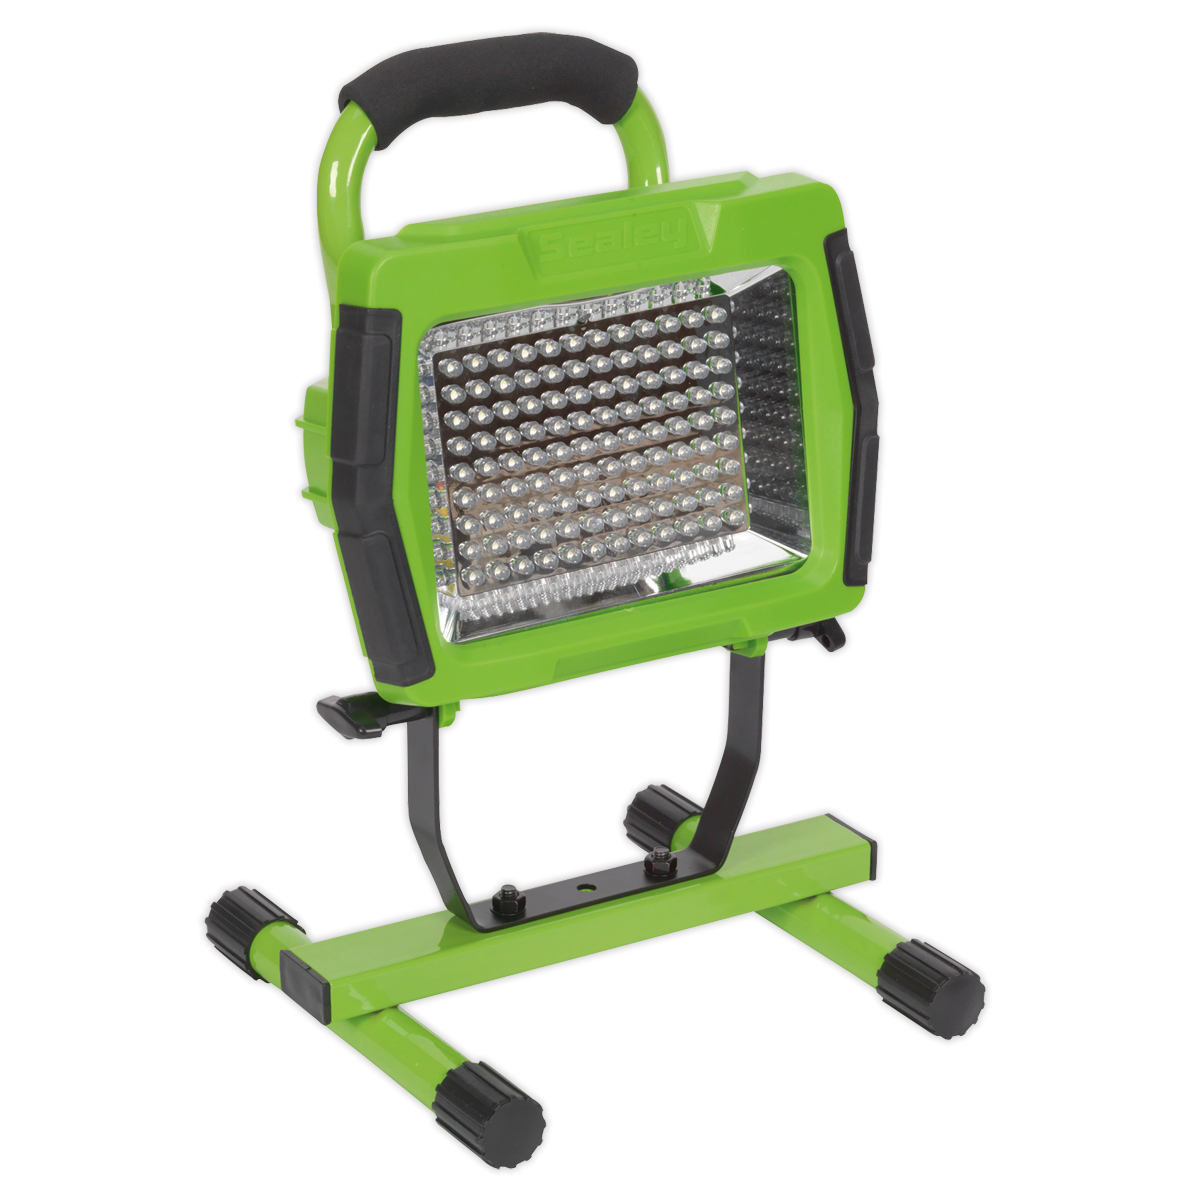 SEALEY FLOODLIGHT PORTABLE RECHARGEABLE108 LED Lithium-ion GREEN